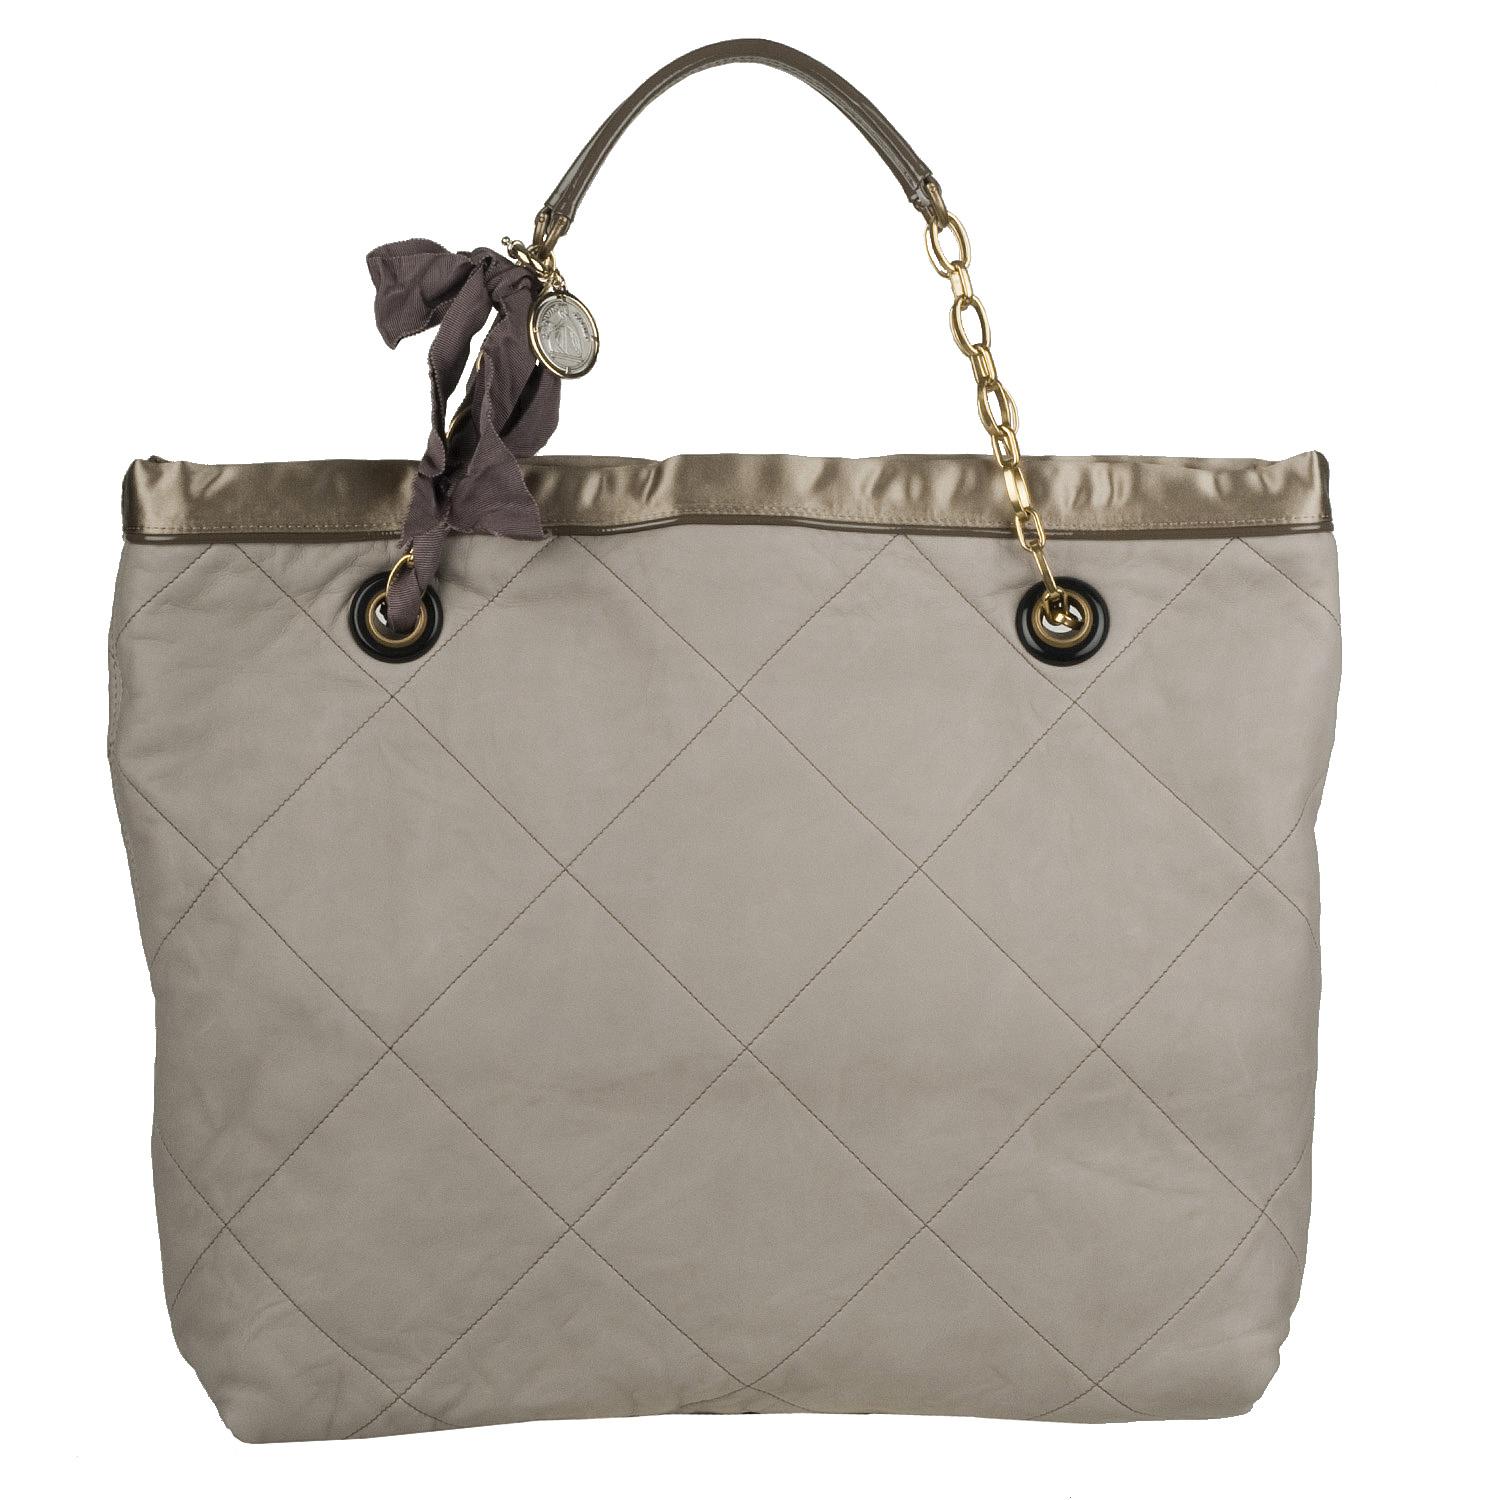 Lanvin Amalia Grey Quilted Leather Tote Bag  